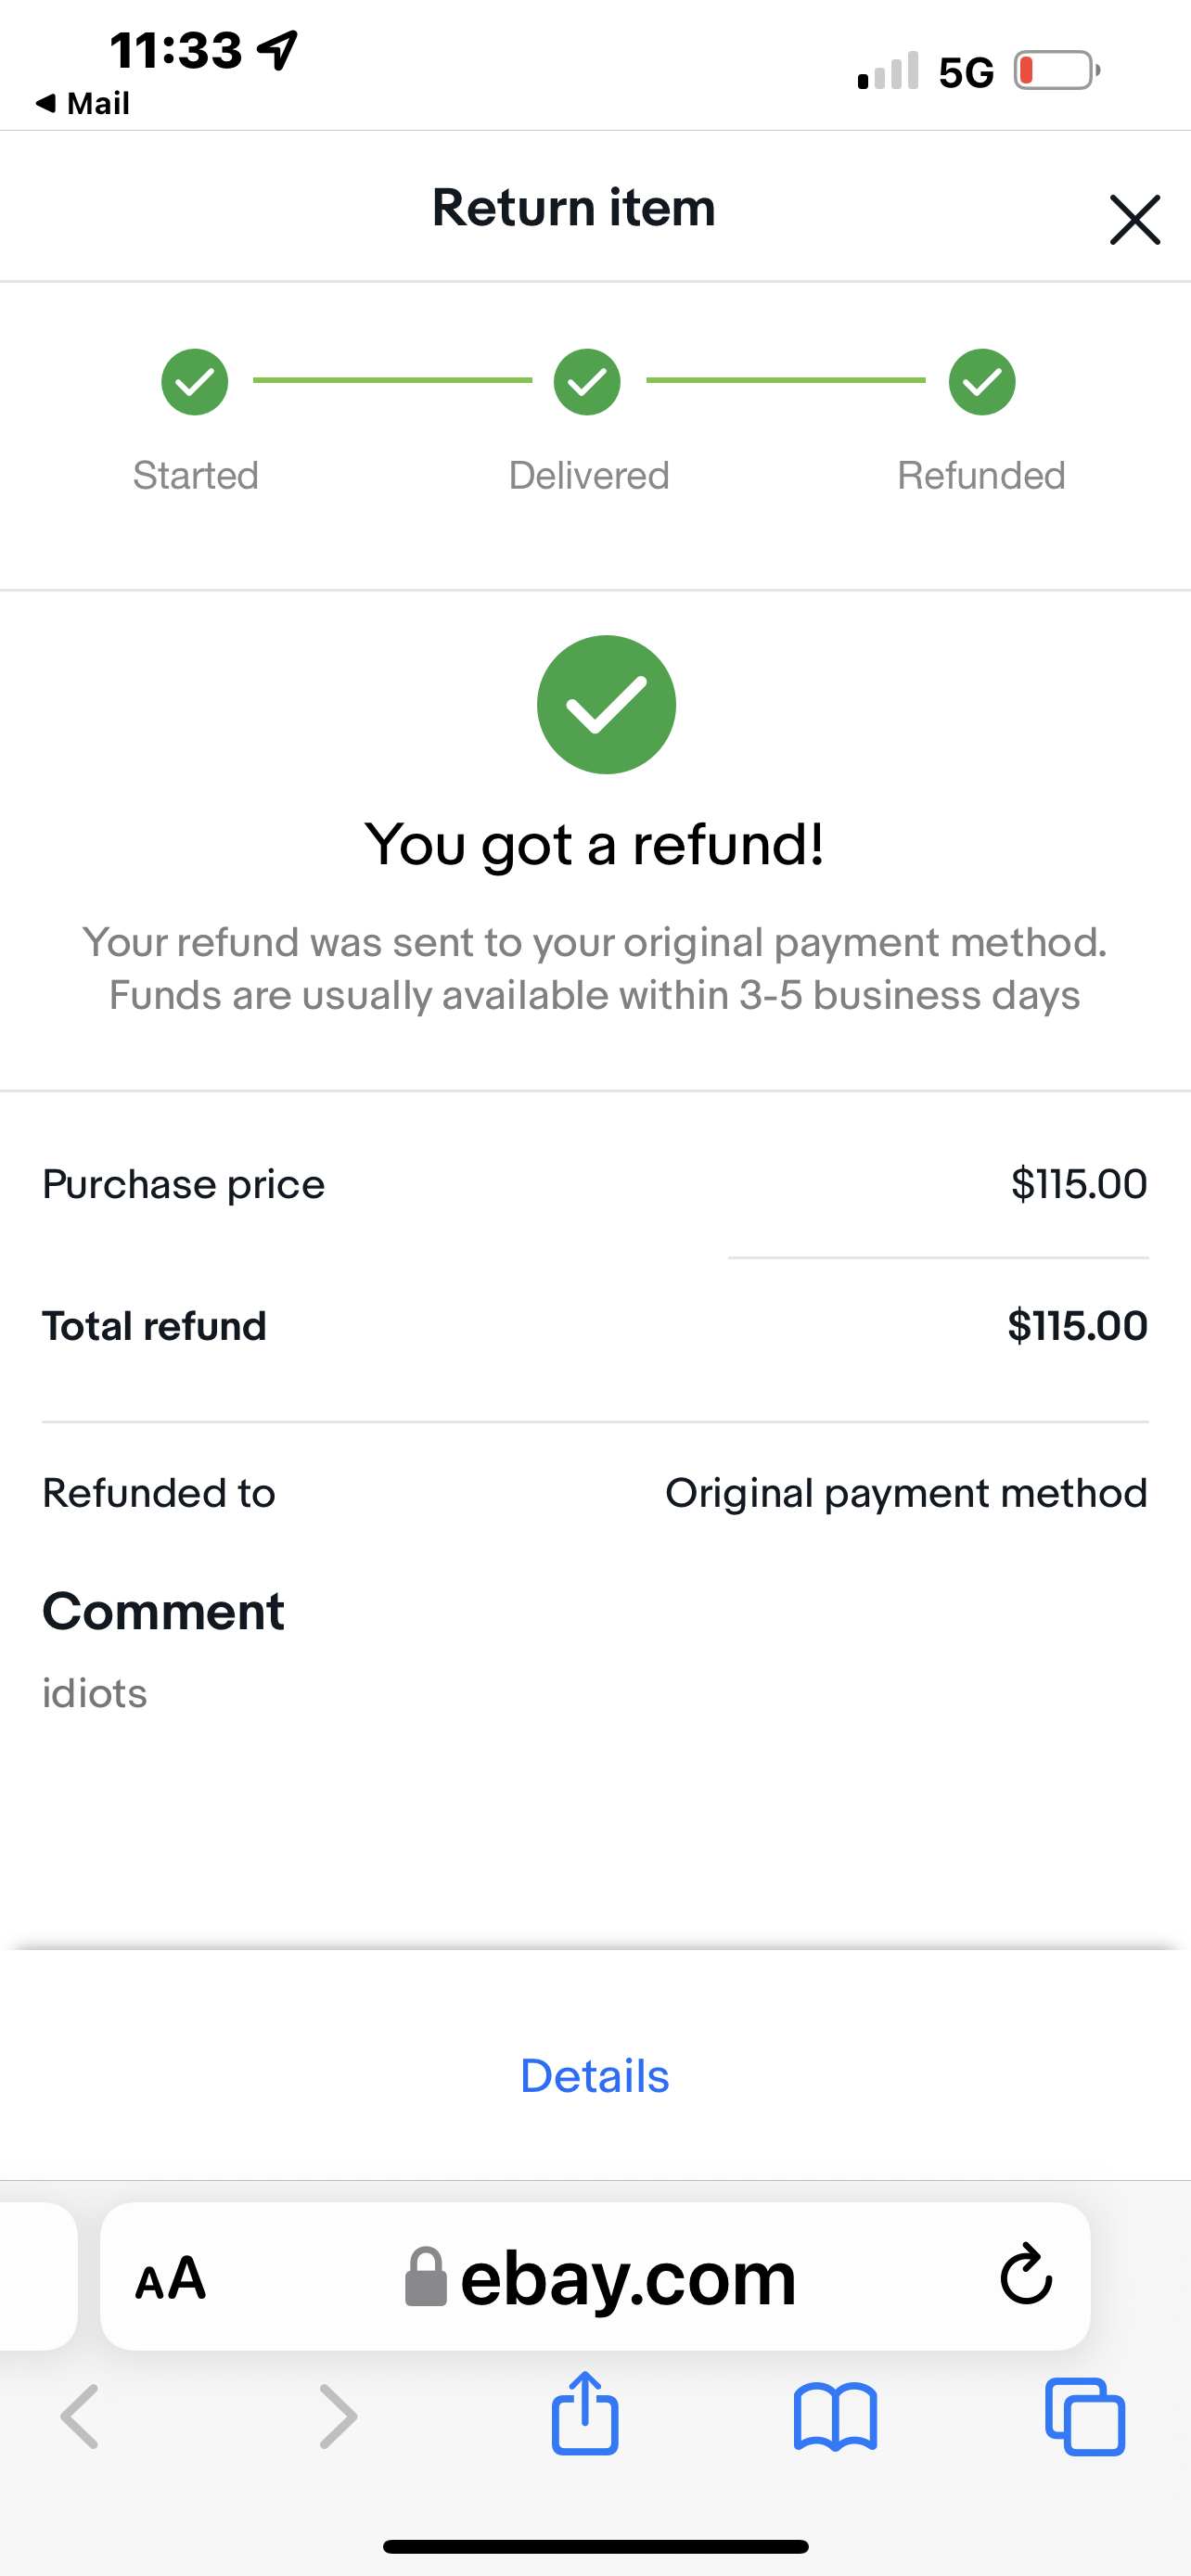 Receipt with refund “idiots” in comment